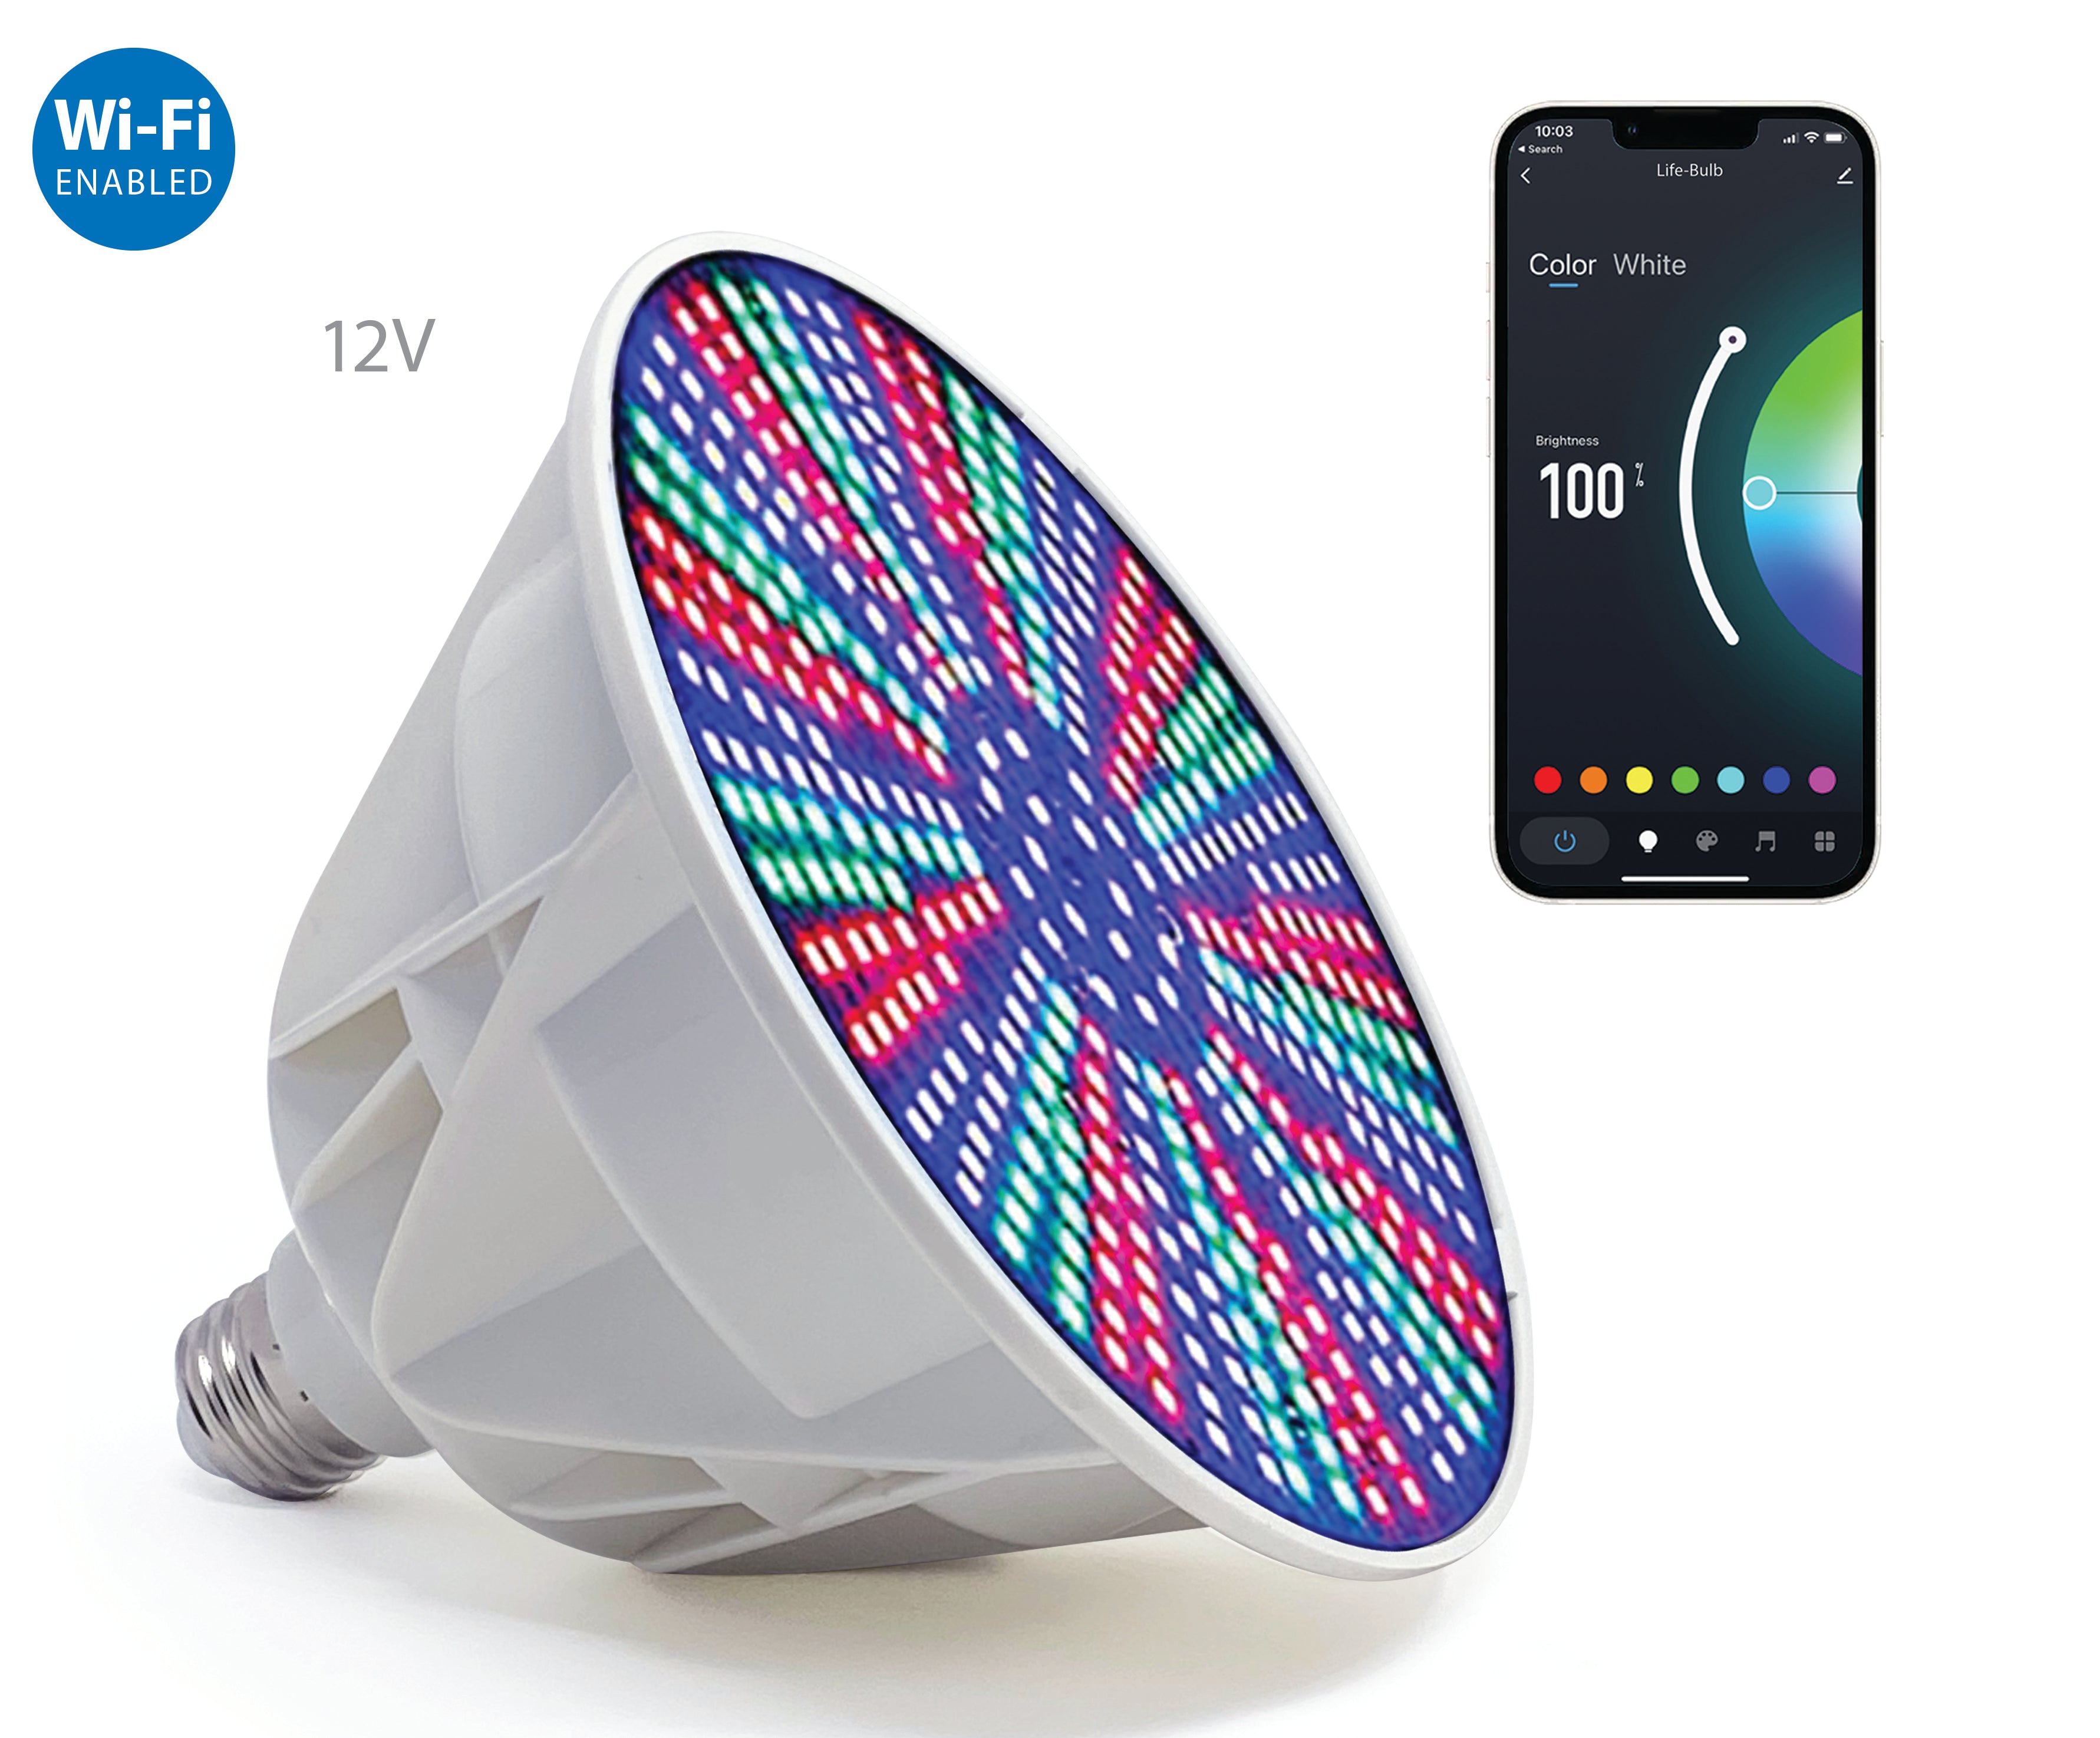 Life-Bulb Smart LED Color Changing Pool Bulb (Replacement) | Requires Smart Bulb Control System to Operate | Works with Remote or Smartphone app - iOS or Android | Lifetime Replacement Warranty